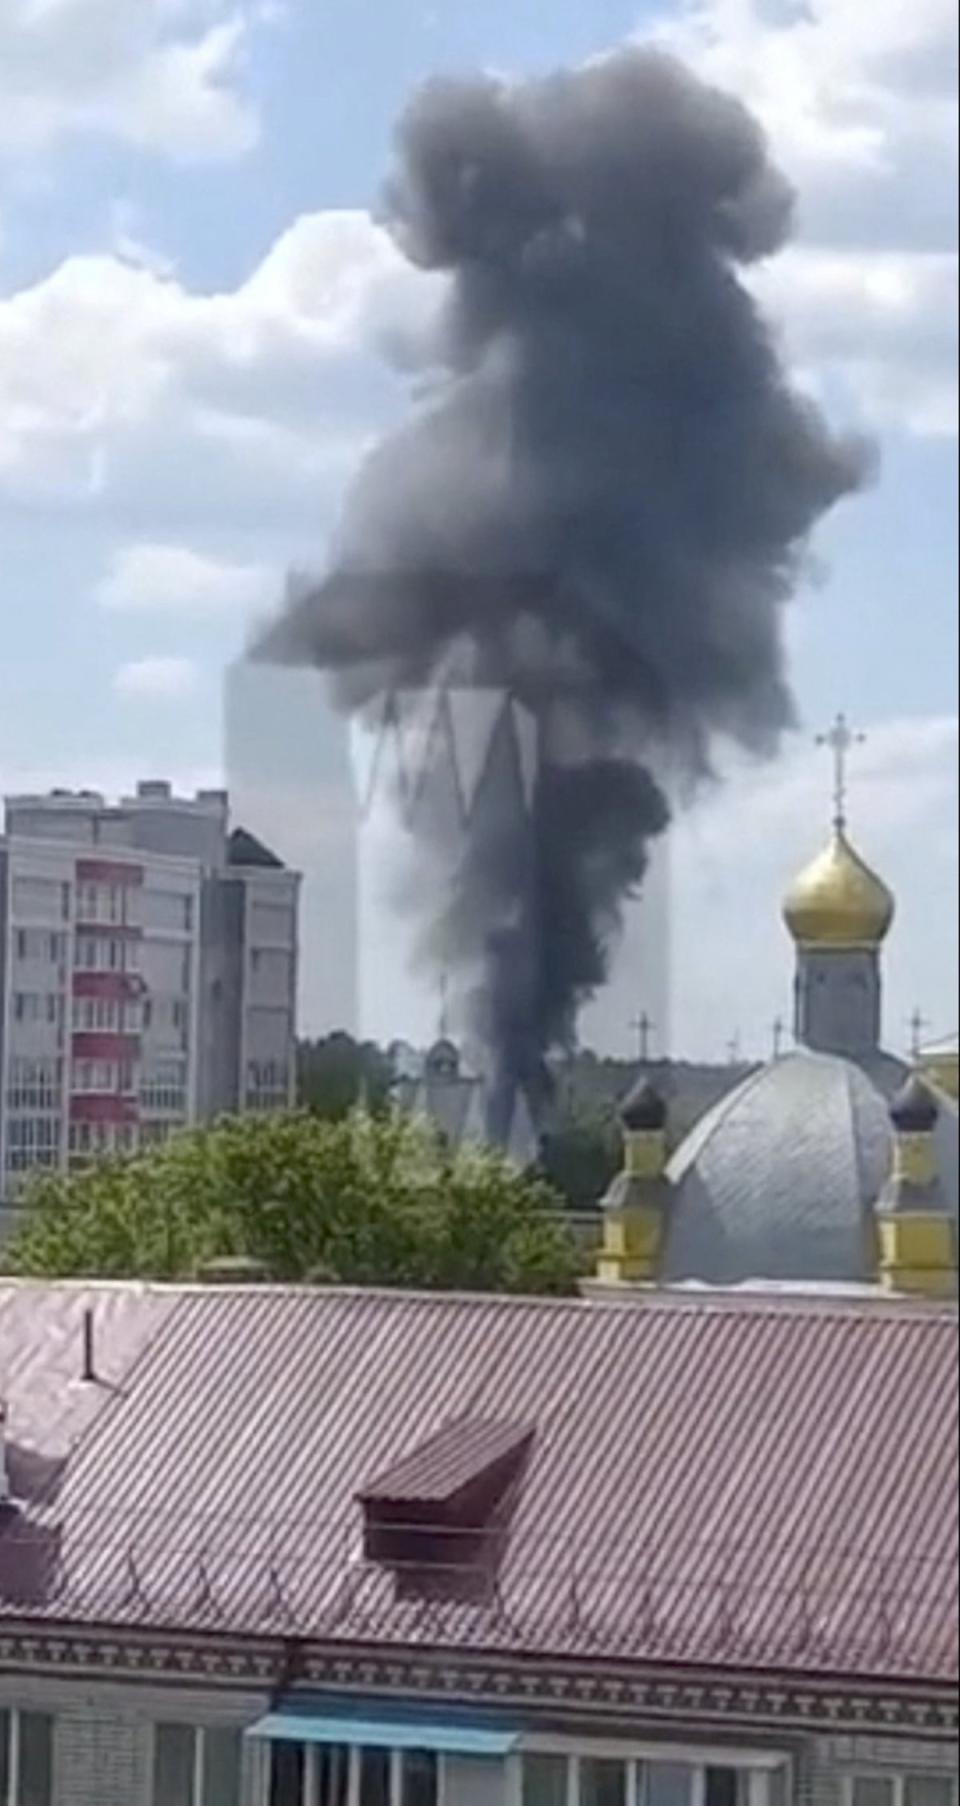 Video shows moment helicopter ‘shot down’ over Russia as ‘multiple aircraft downed’ in Bryansk